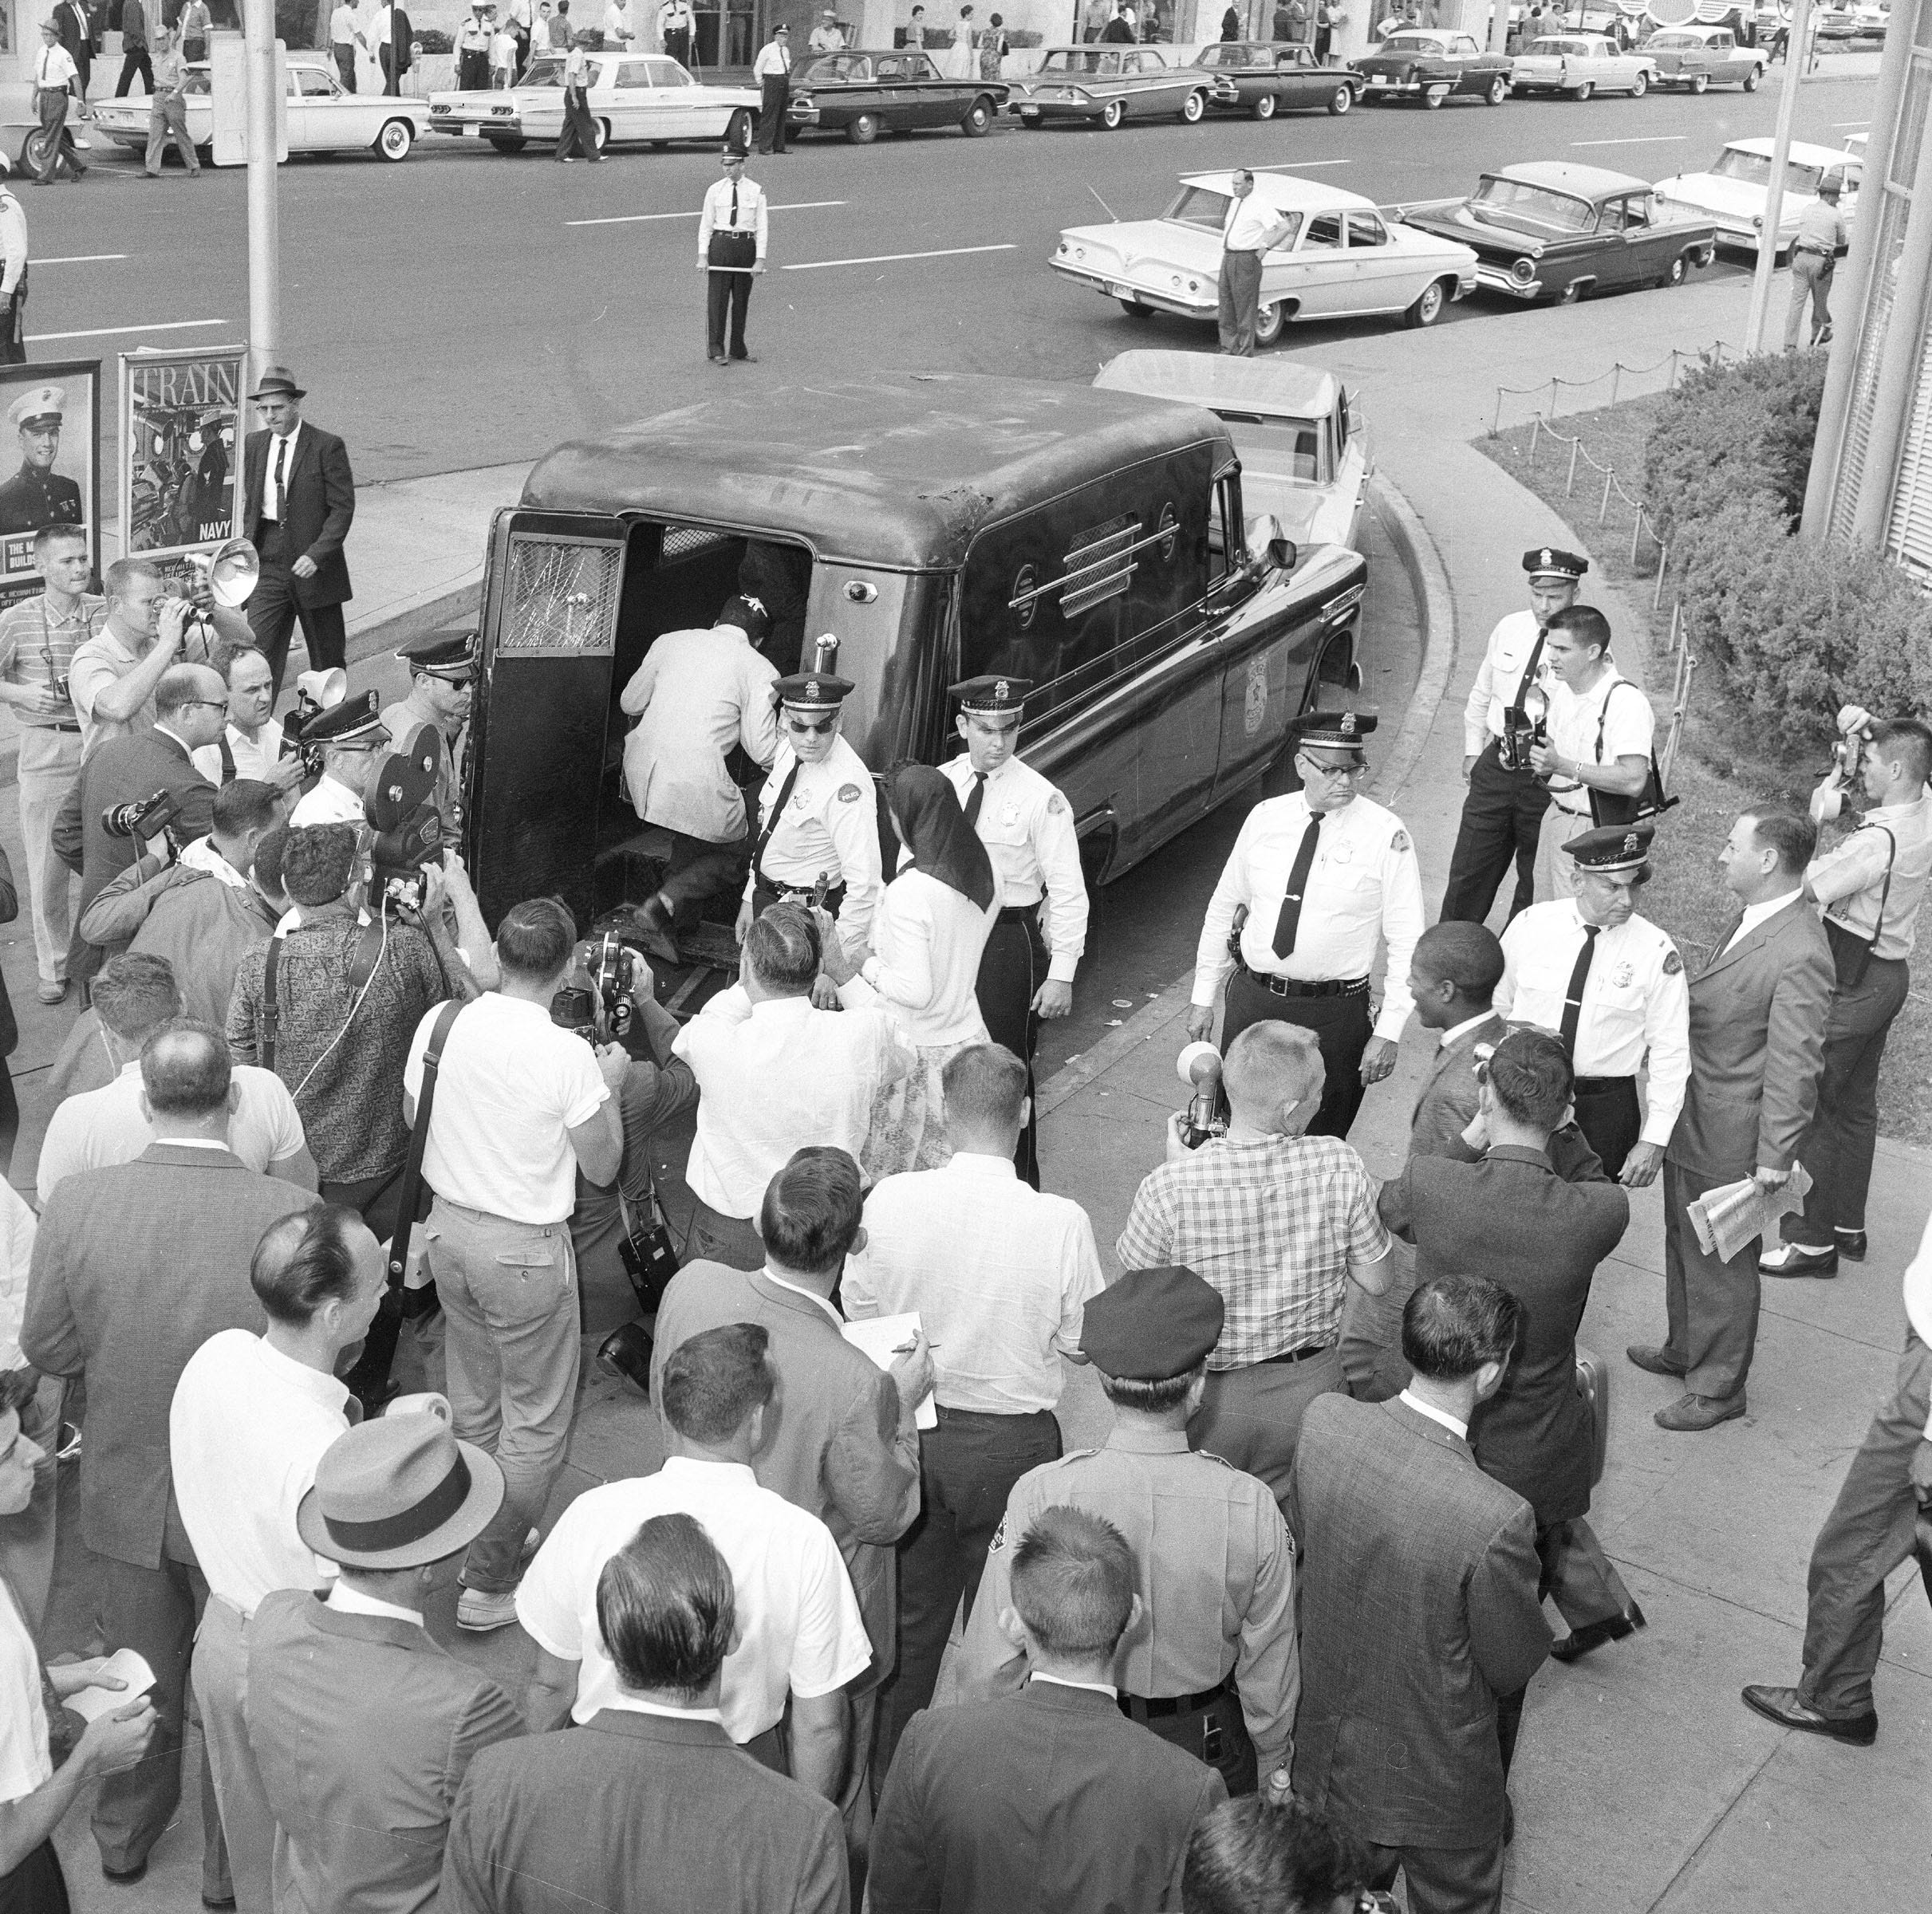 Fifteen Freedom Riders that arrived on a second bus in Jackson, Miss., are loaded into a paddy wagon at the bus station, May 24, 1961.  They entered the "whites only" waiting room and were arrested for being in violation of state laws. 